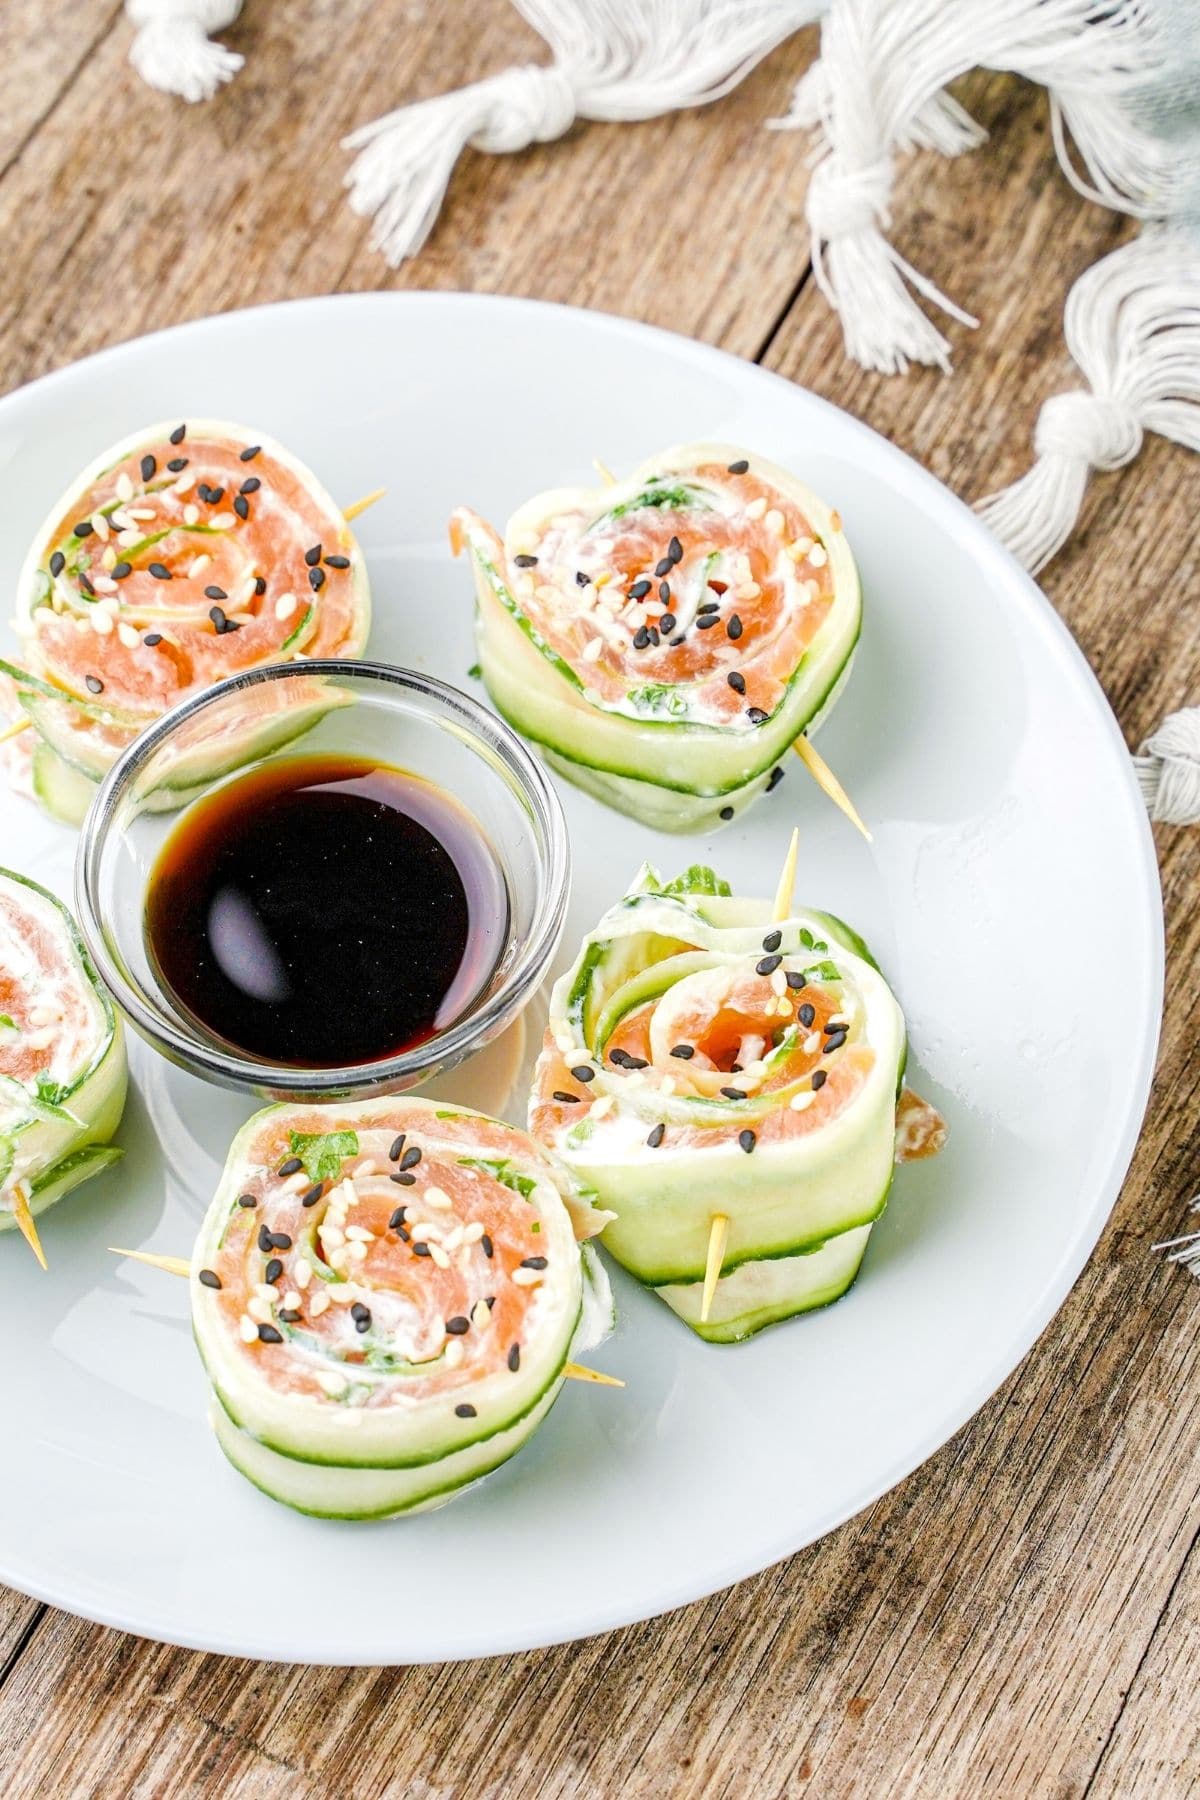 cucumber rolls held together by toothpicks on white plate with small glass bowl of soy sauce in center of plate